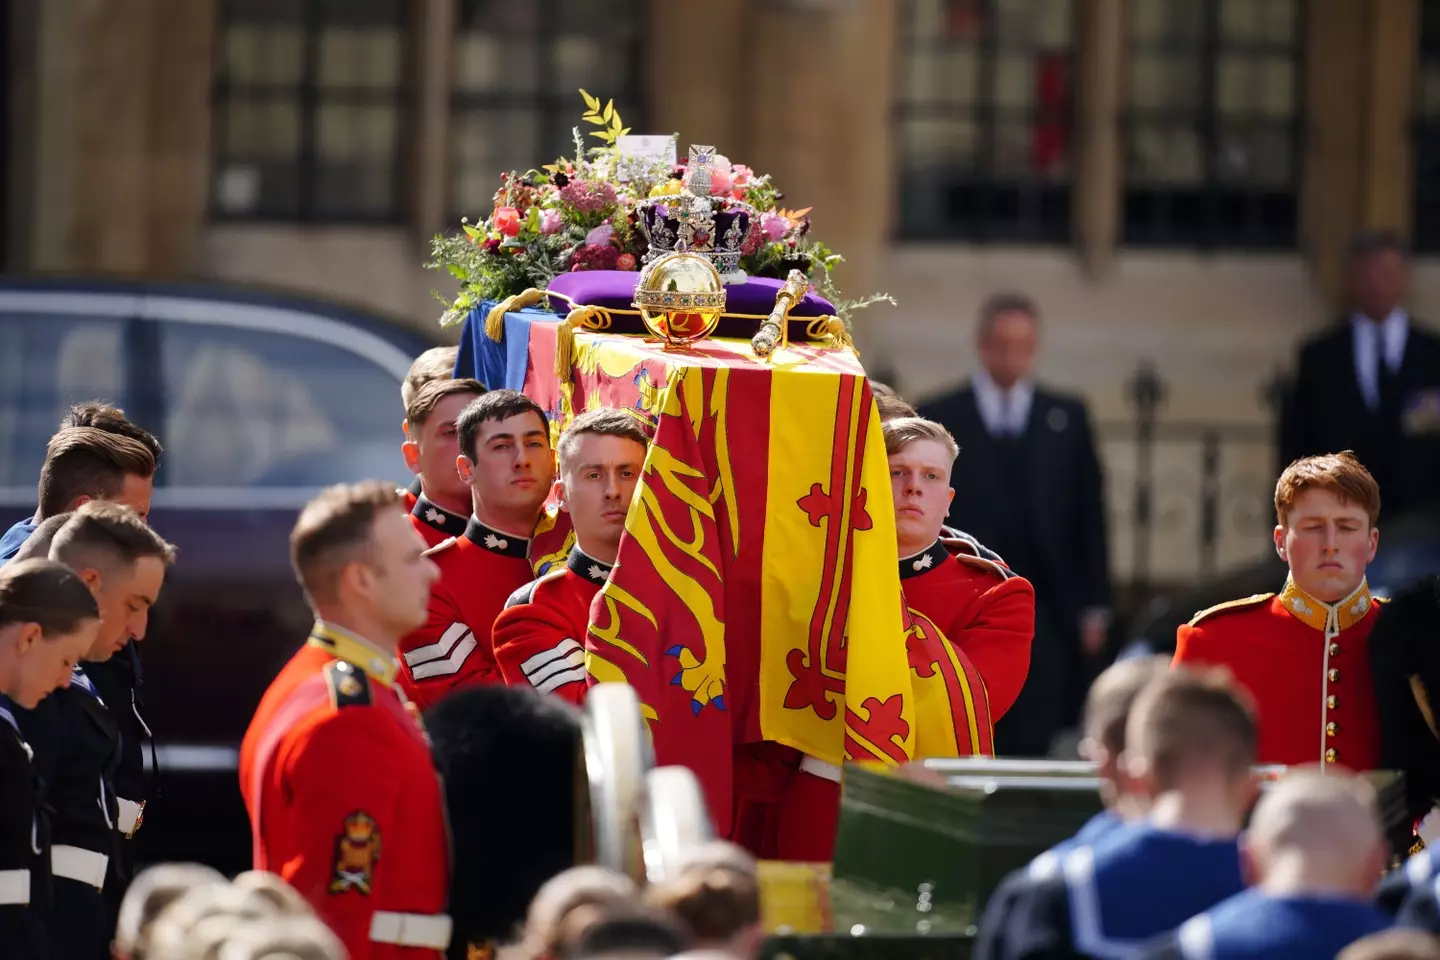 David was one of eight pallbearers to carry the coffin.